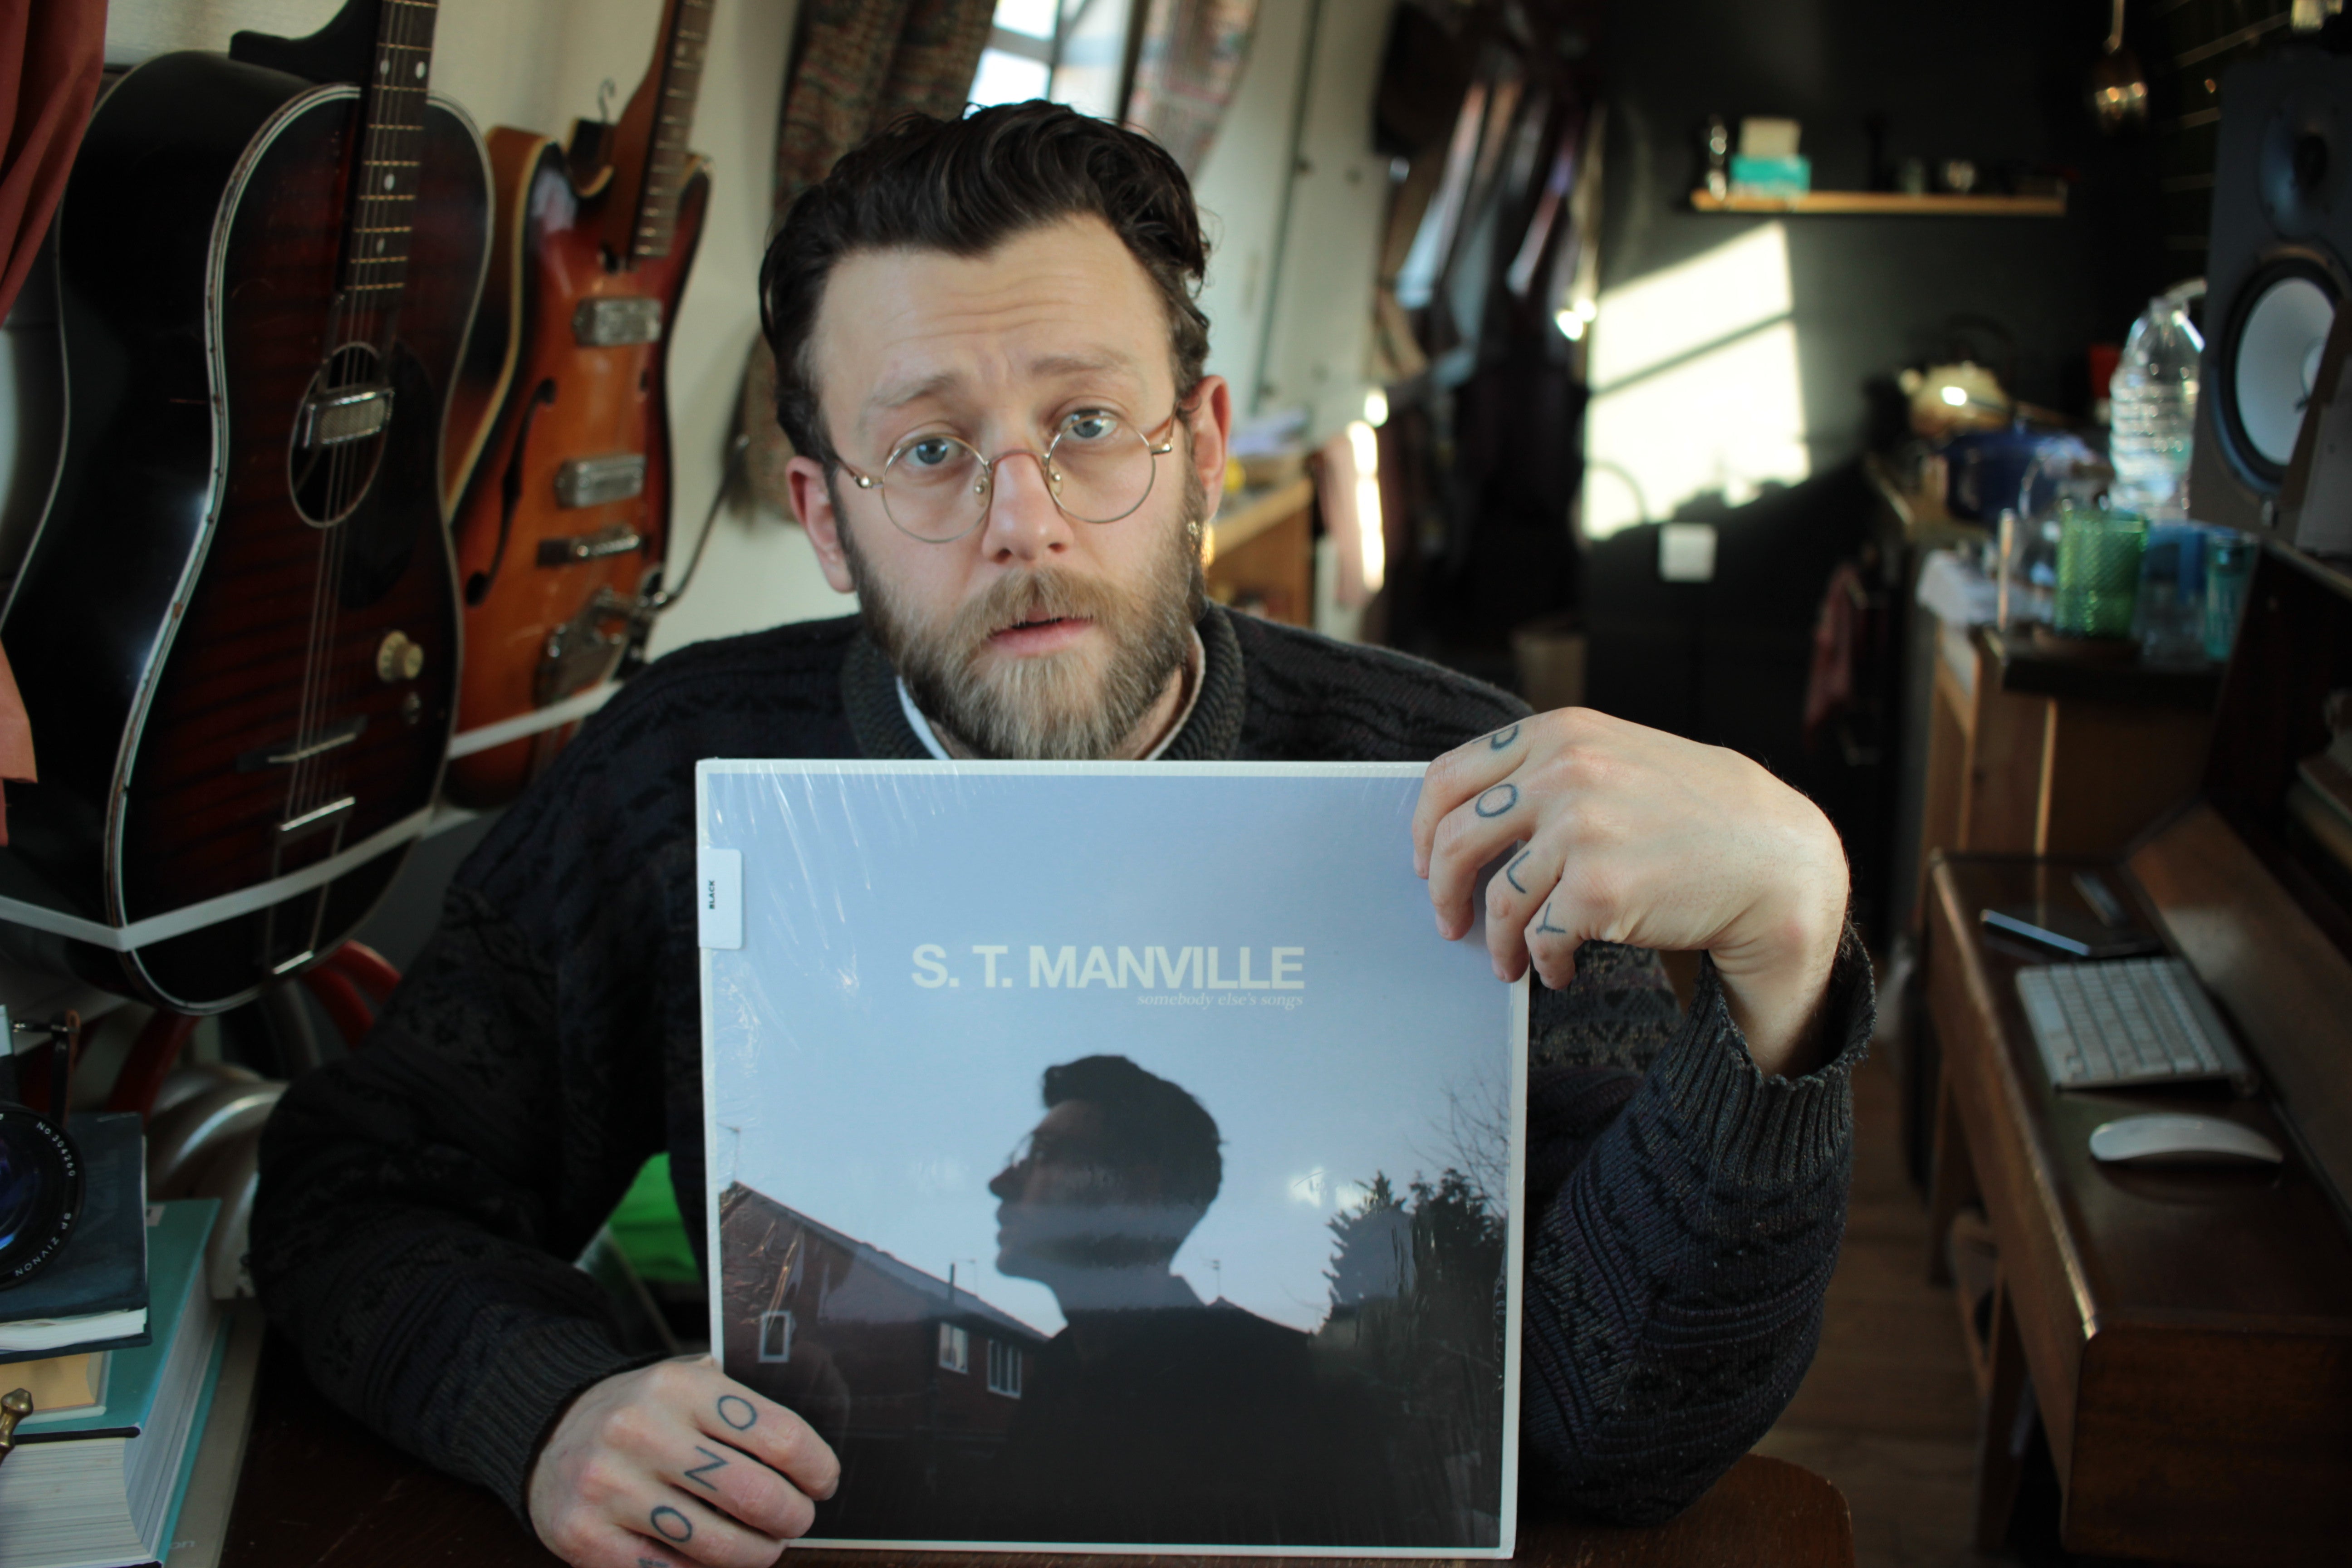 S.T. Manville's 'Somebody Else's Songs' is out!